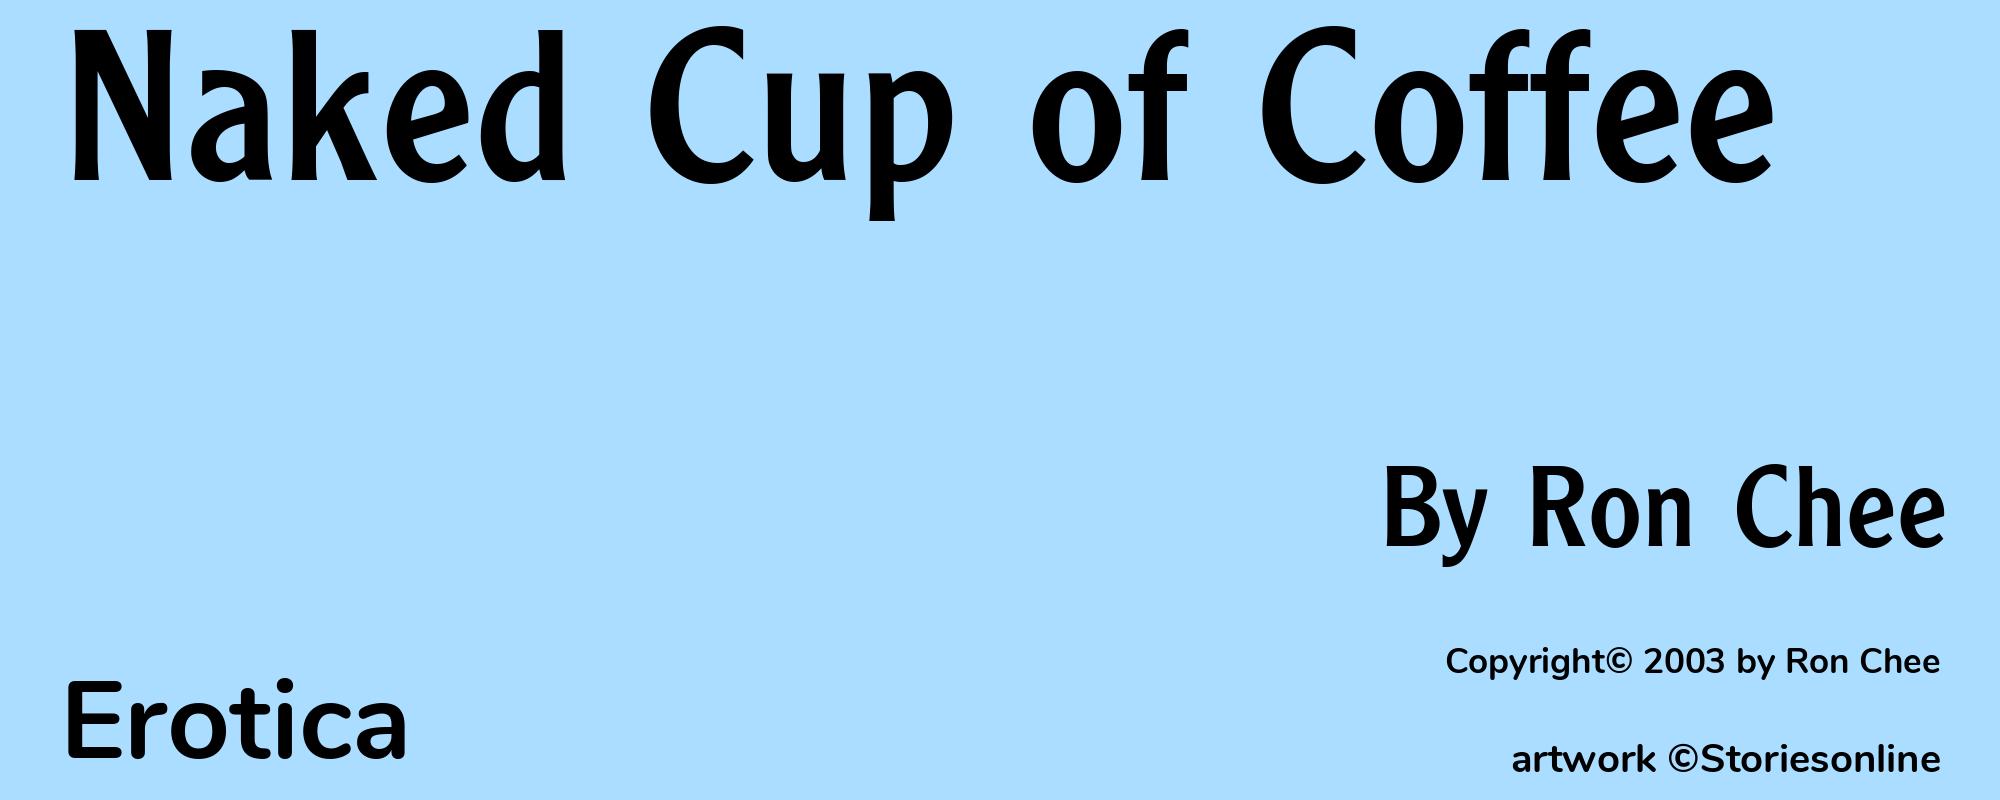 Naked Cup of Coffee - Cover